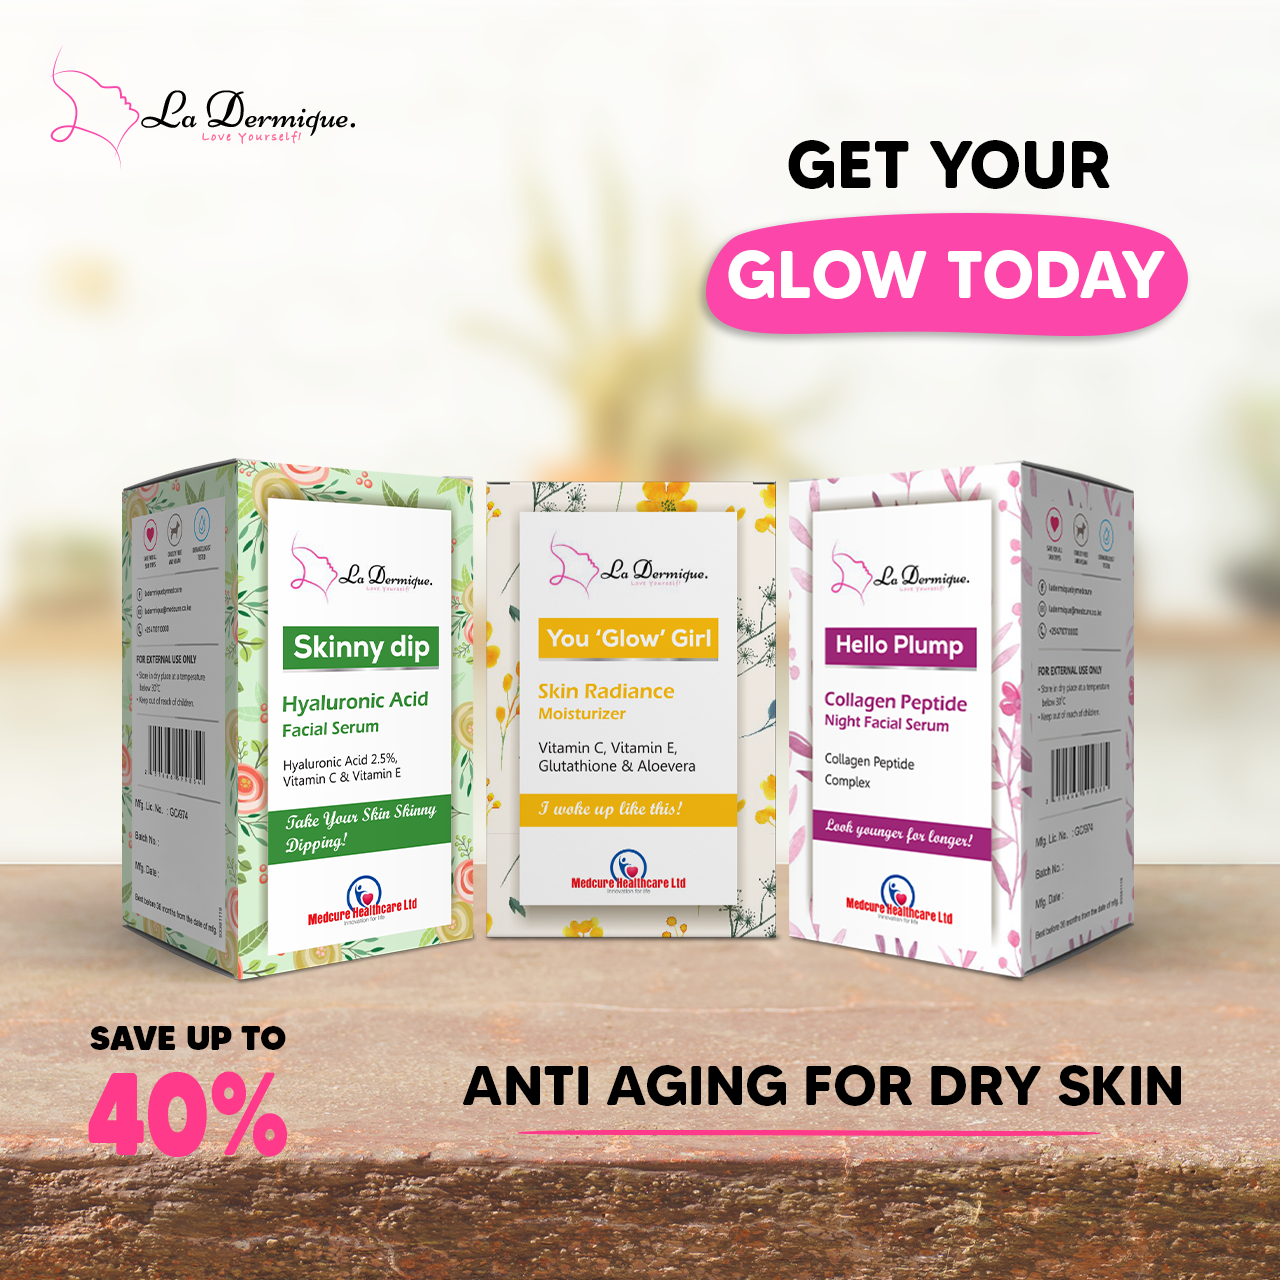 ANTI AGING FOR DRY SKIN 4